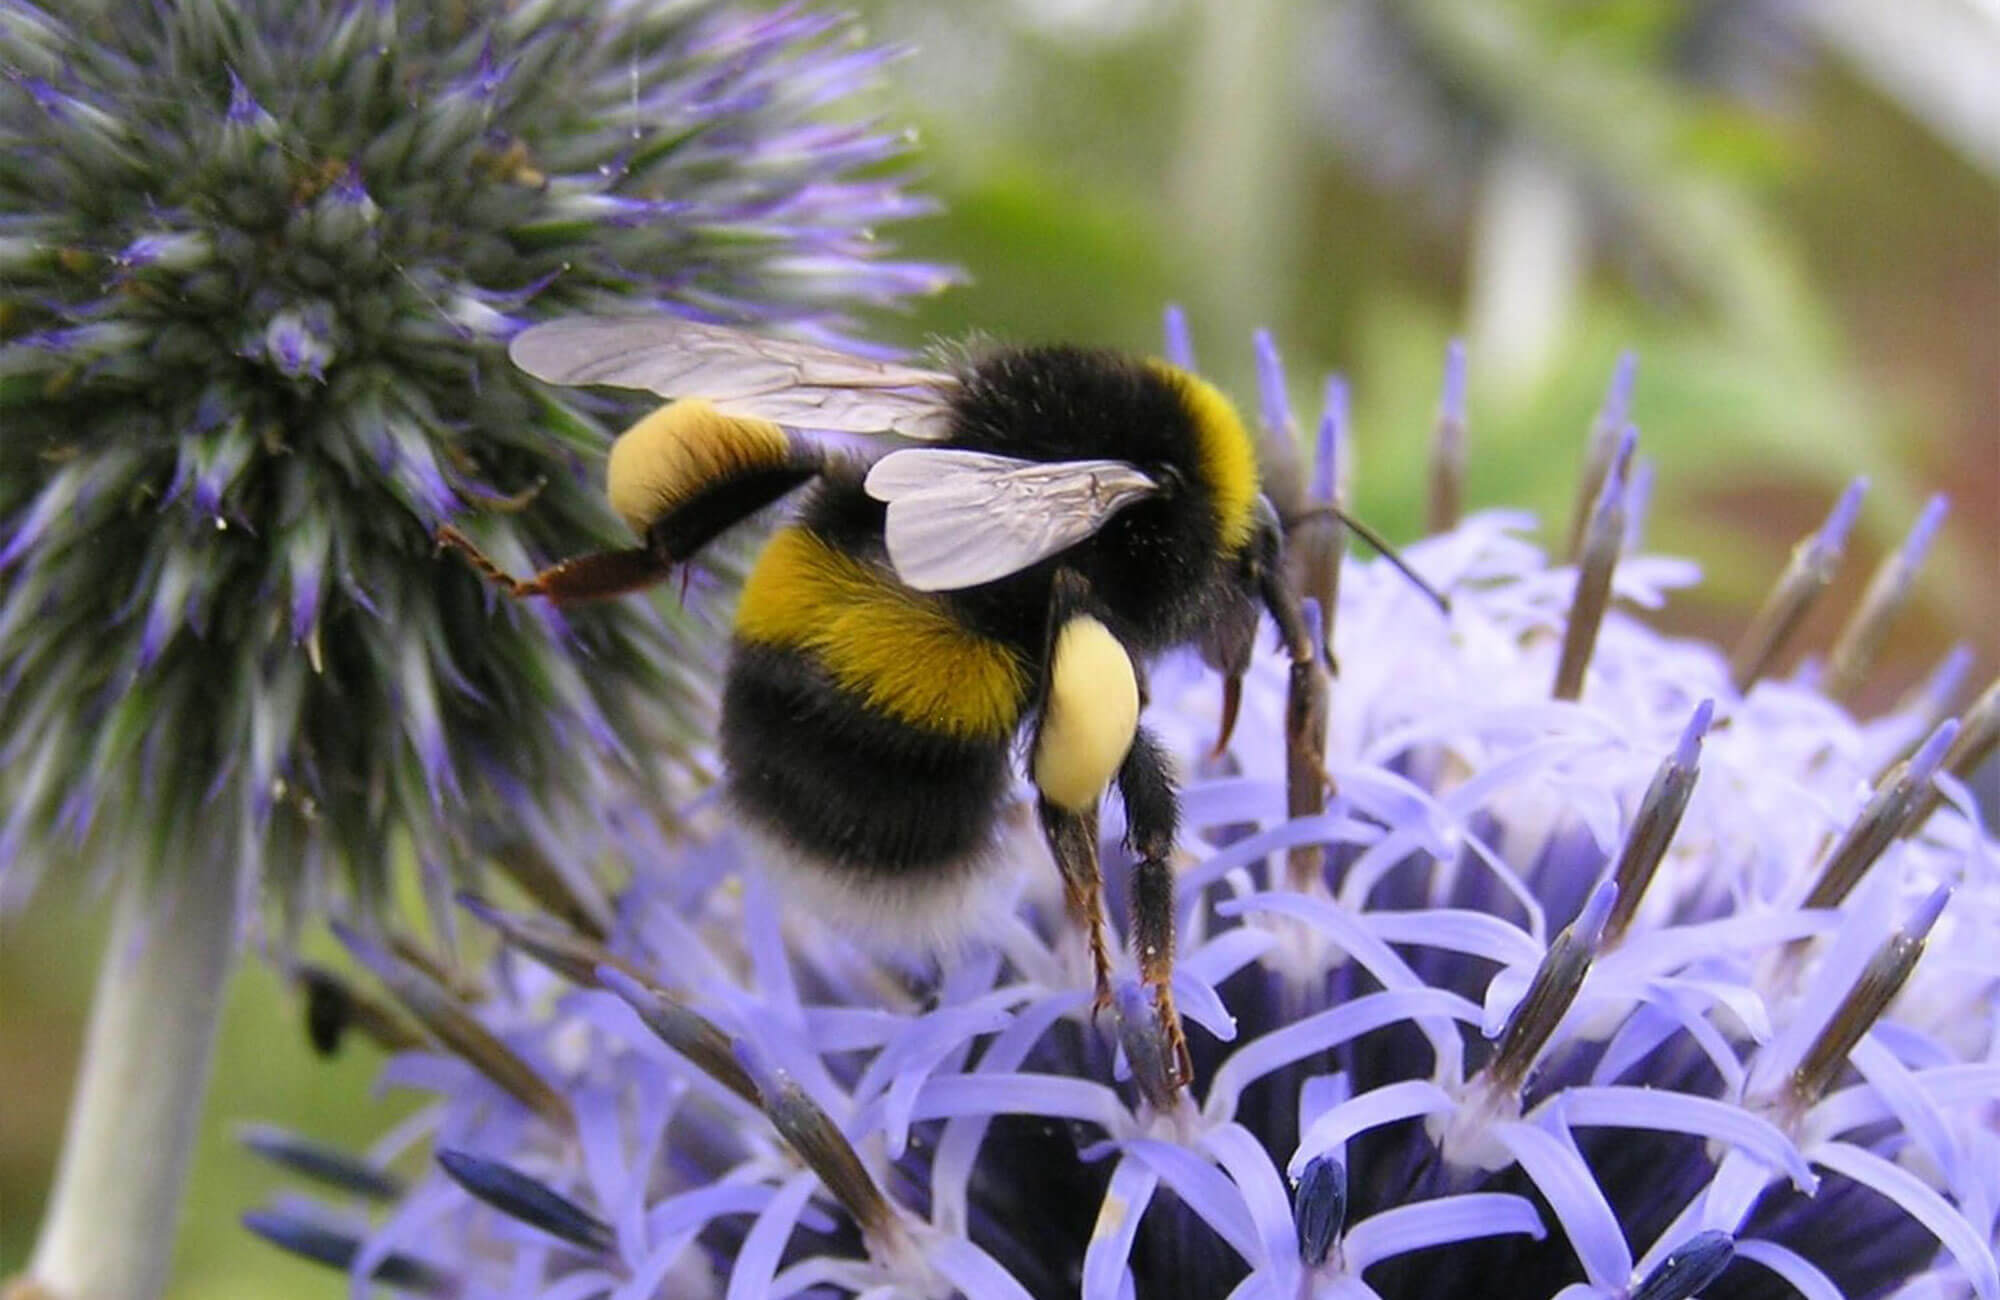 Why are bumblebees so important?